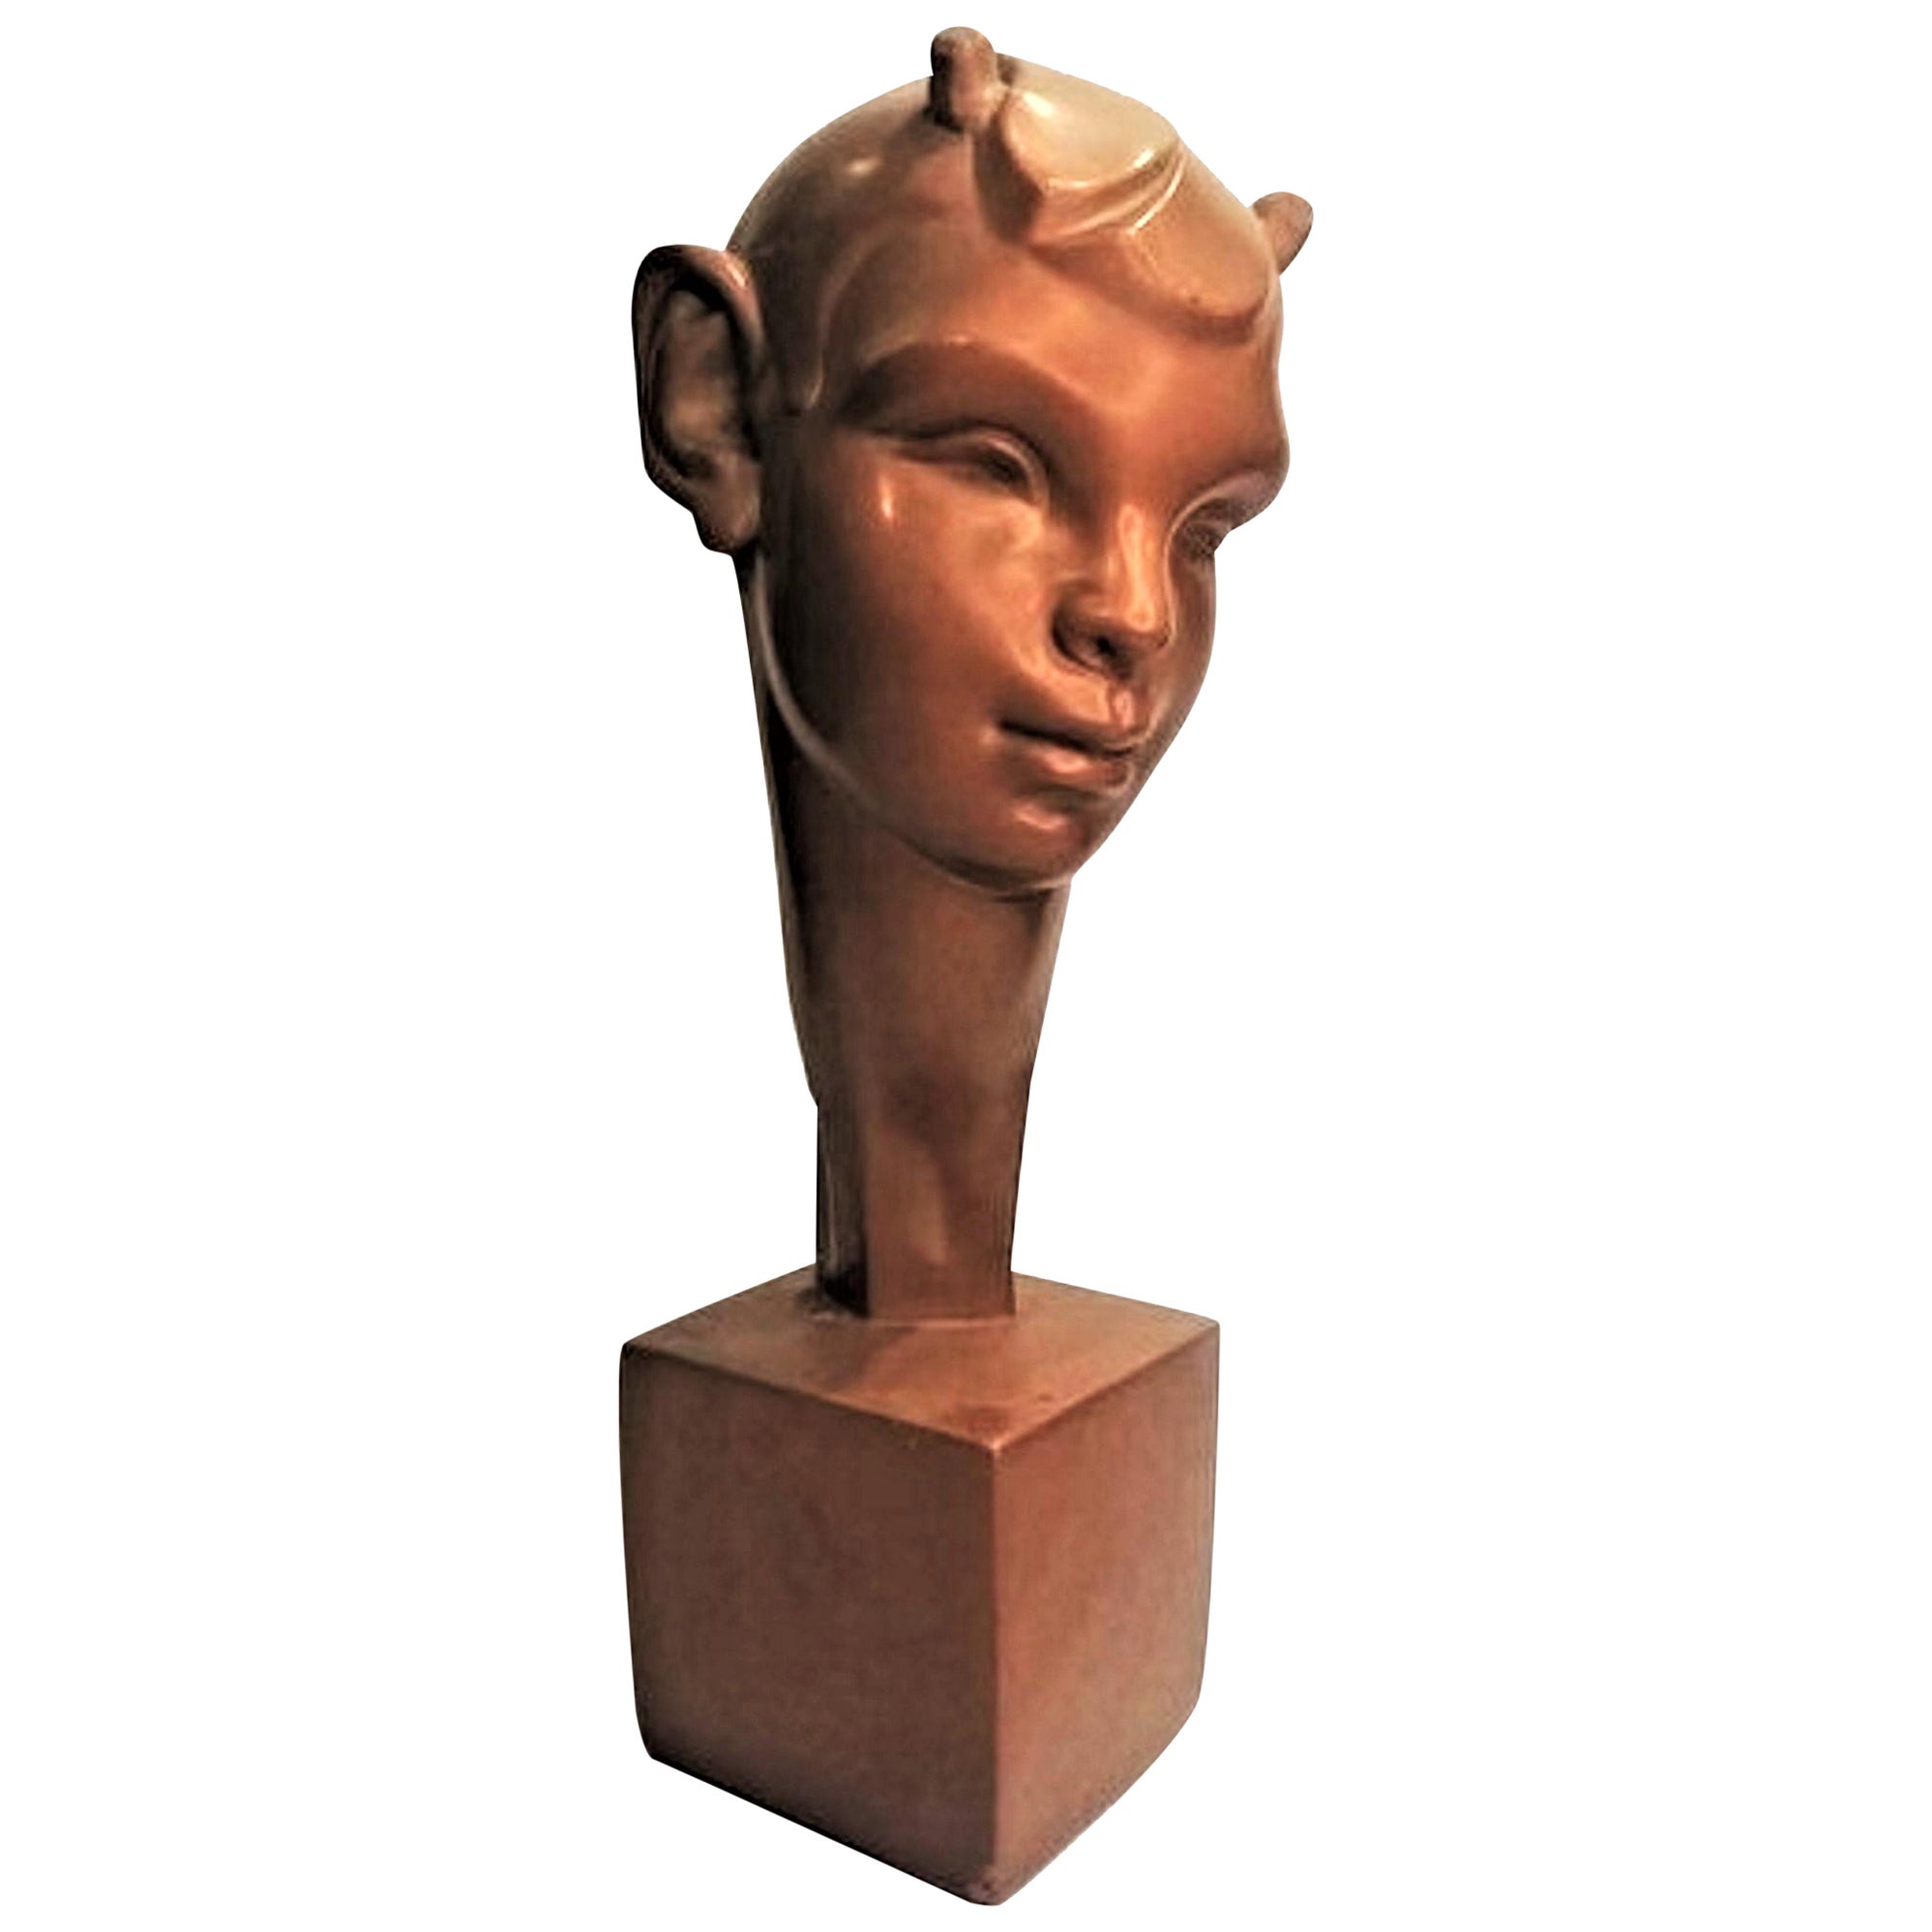 Fred Press, American Art Deco, Painted Plaster Bust of a Faun, ca. 1930s